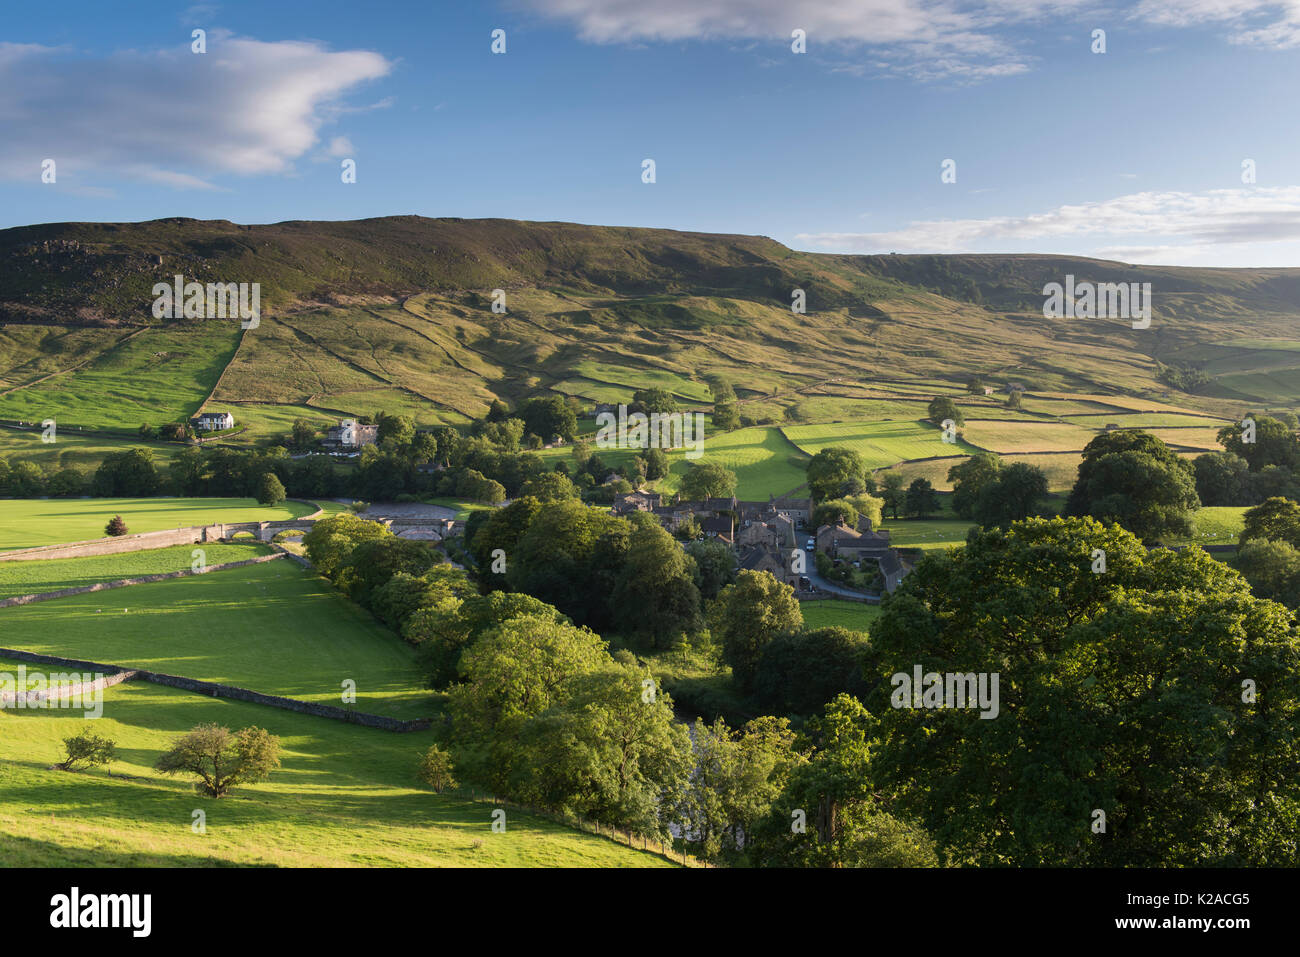 Scenic sunny Burnsall village in River Wharfe valley (hillside slopes, high hills, green fields, pastures, blue sky) - Yorkshire Dales, England, UK. Stock Photo